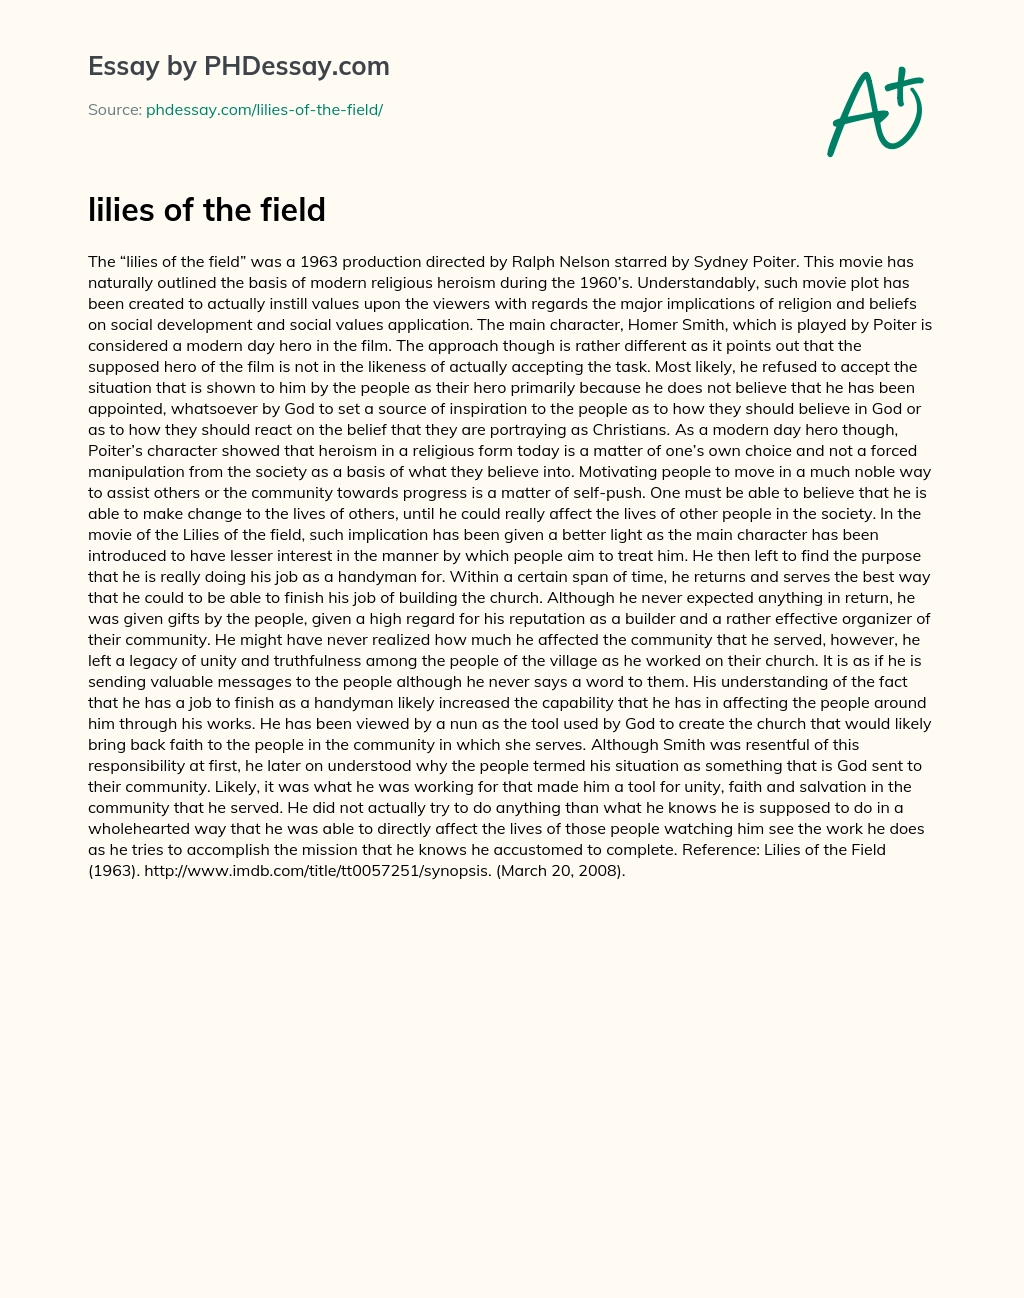 lilies of the field essay